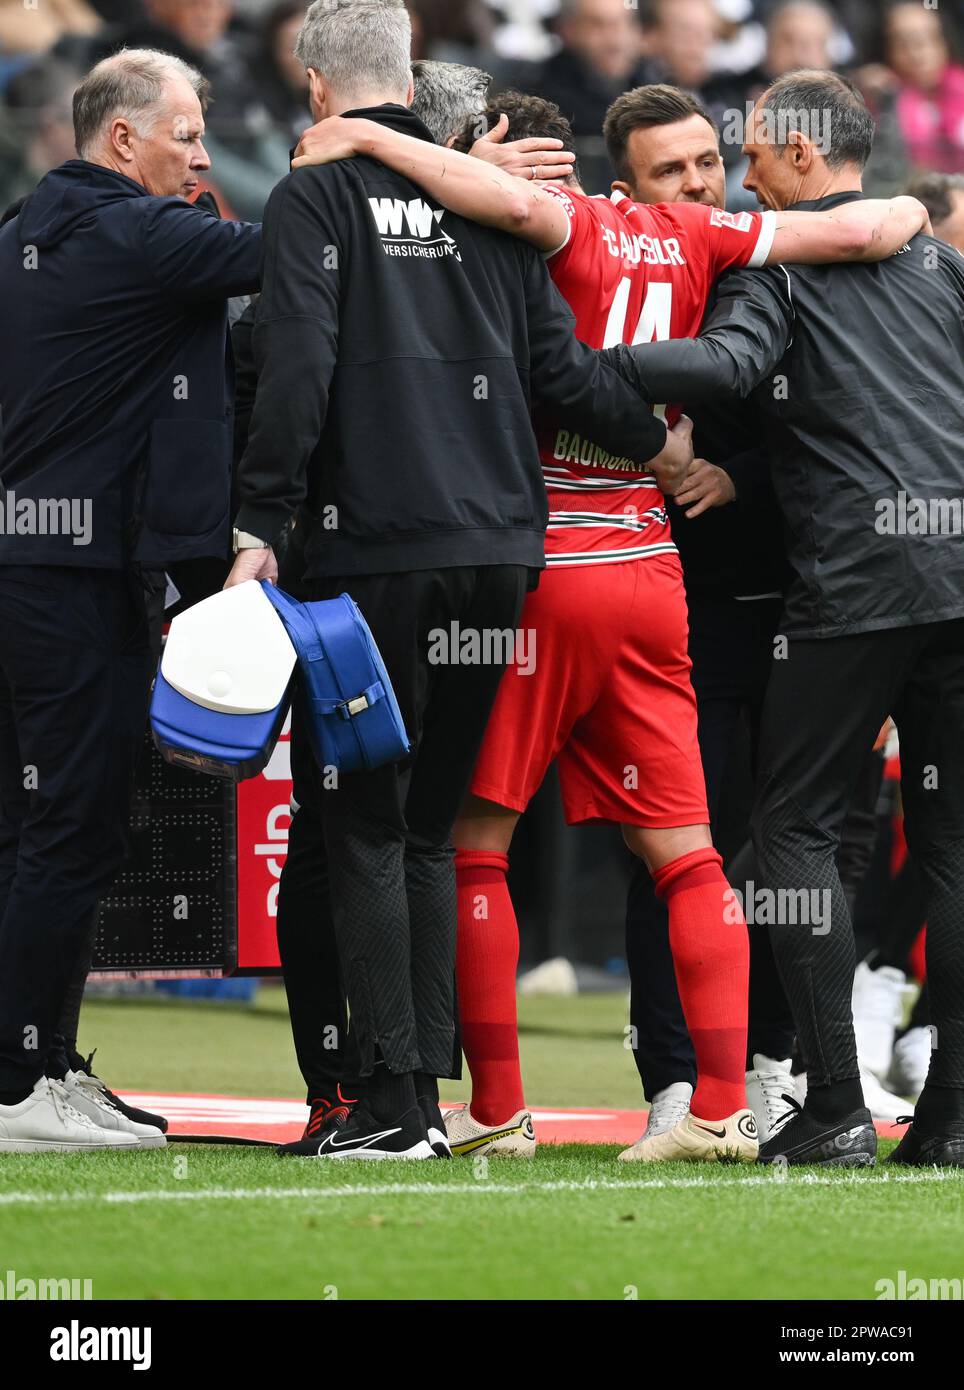 29 April 2023, Hesse, Frankfurt/Main: Soccer: Bundesliga, Eintracht Frankfurt - FC Augsburg, Matchday 30, Deutsche Bank Park. Stefan Reuter (l), Managing Director Sport, and Augsburg's head coach Enrico Maaßen (2nd from right) check on injured player Julian Baumgartlinger. Photo: Arne Dedert/dpa - IMPORTANT NOTE: In accordance with the requirements of the DFL Deutsche Fußball Liga and the DFB Deutscher Fußball-Bund, it is prohibited to use or have used photographs taken in the stadium and/or of the match in the form of sequence pictures and/or video-like photo series. Stock Photo